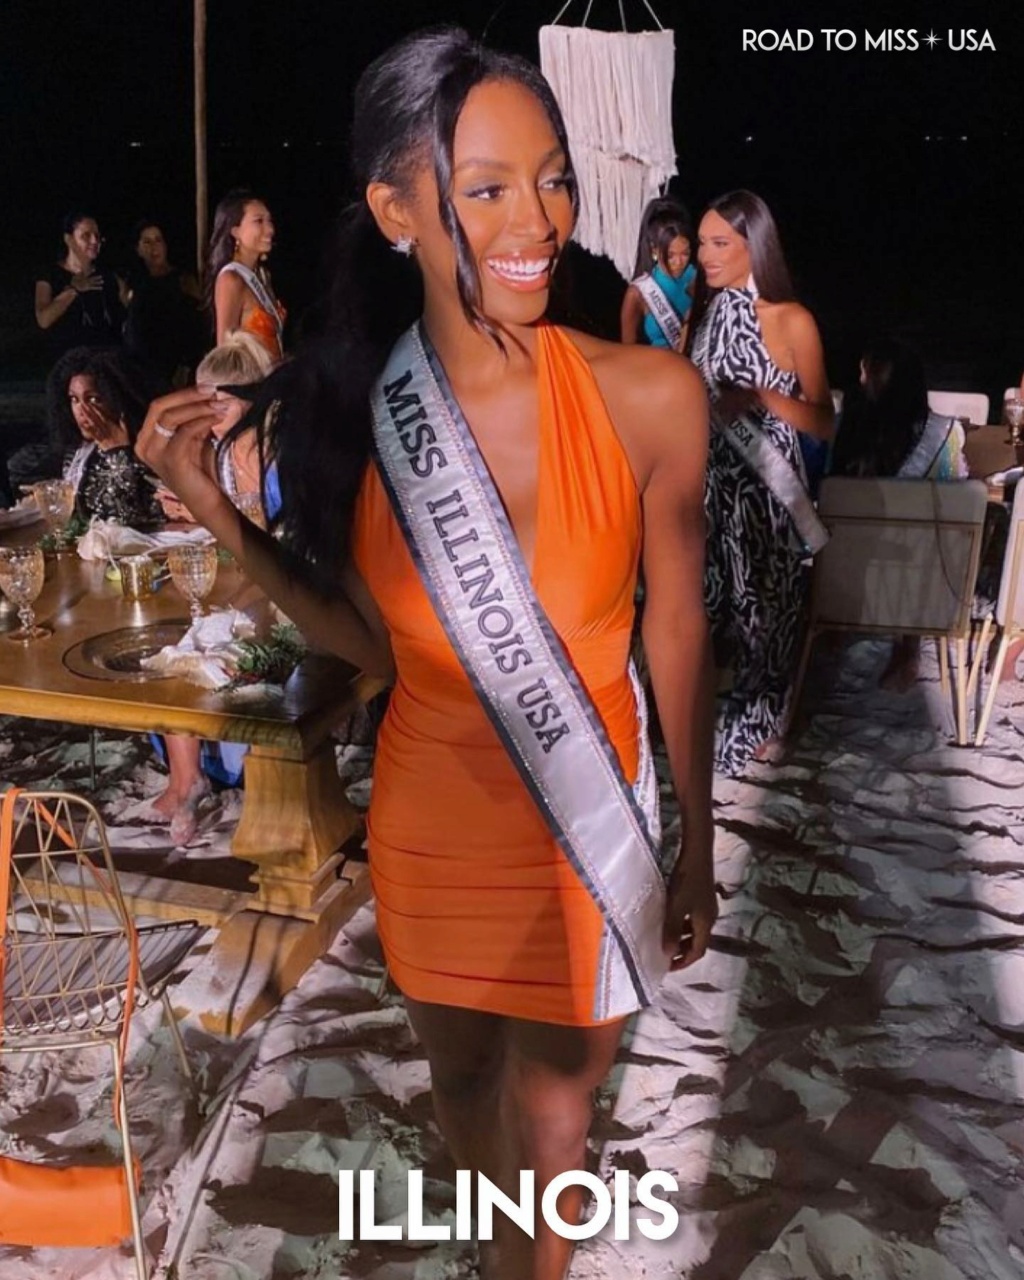 ROAD TO MISS USA 2021 is KENTUCKY! - Page 3 24200310